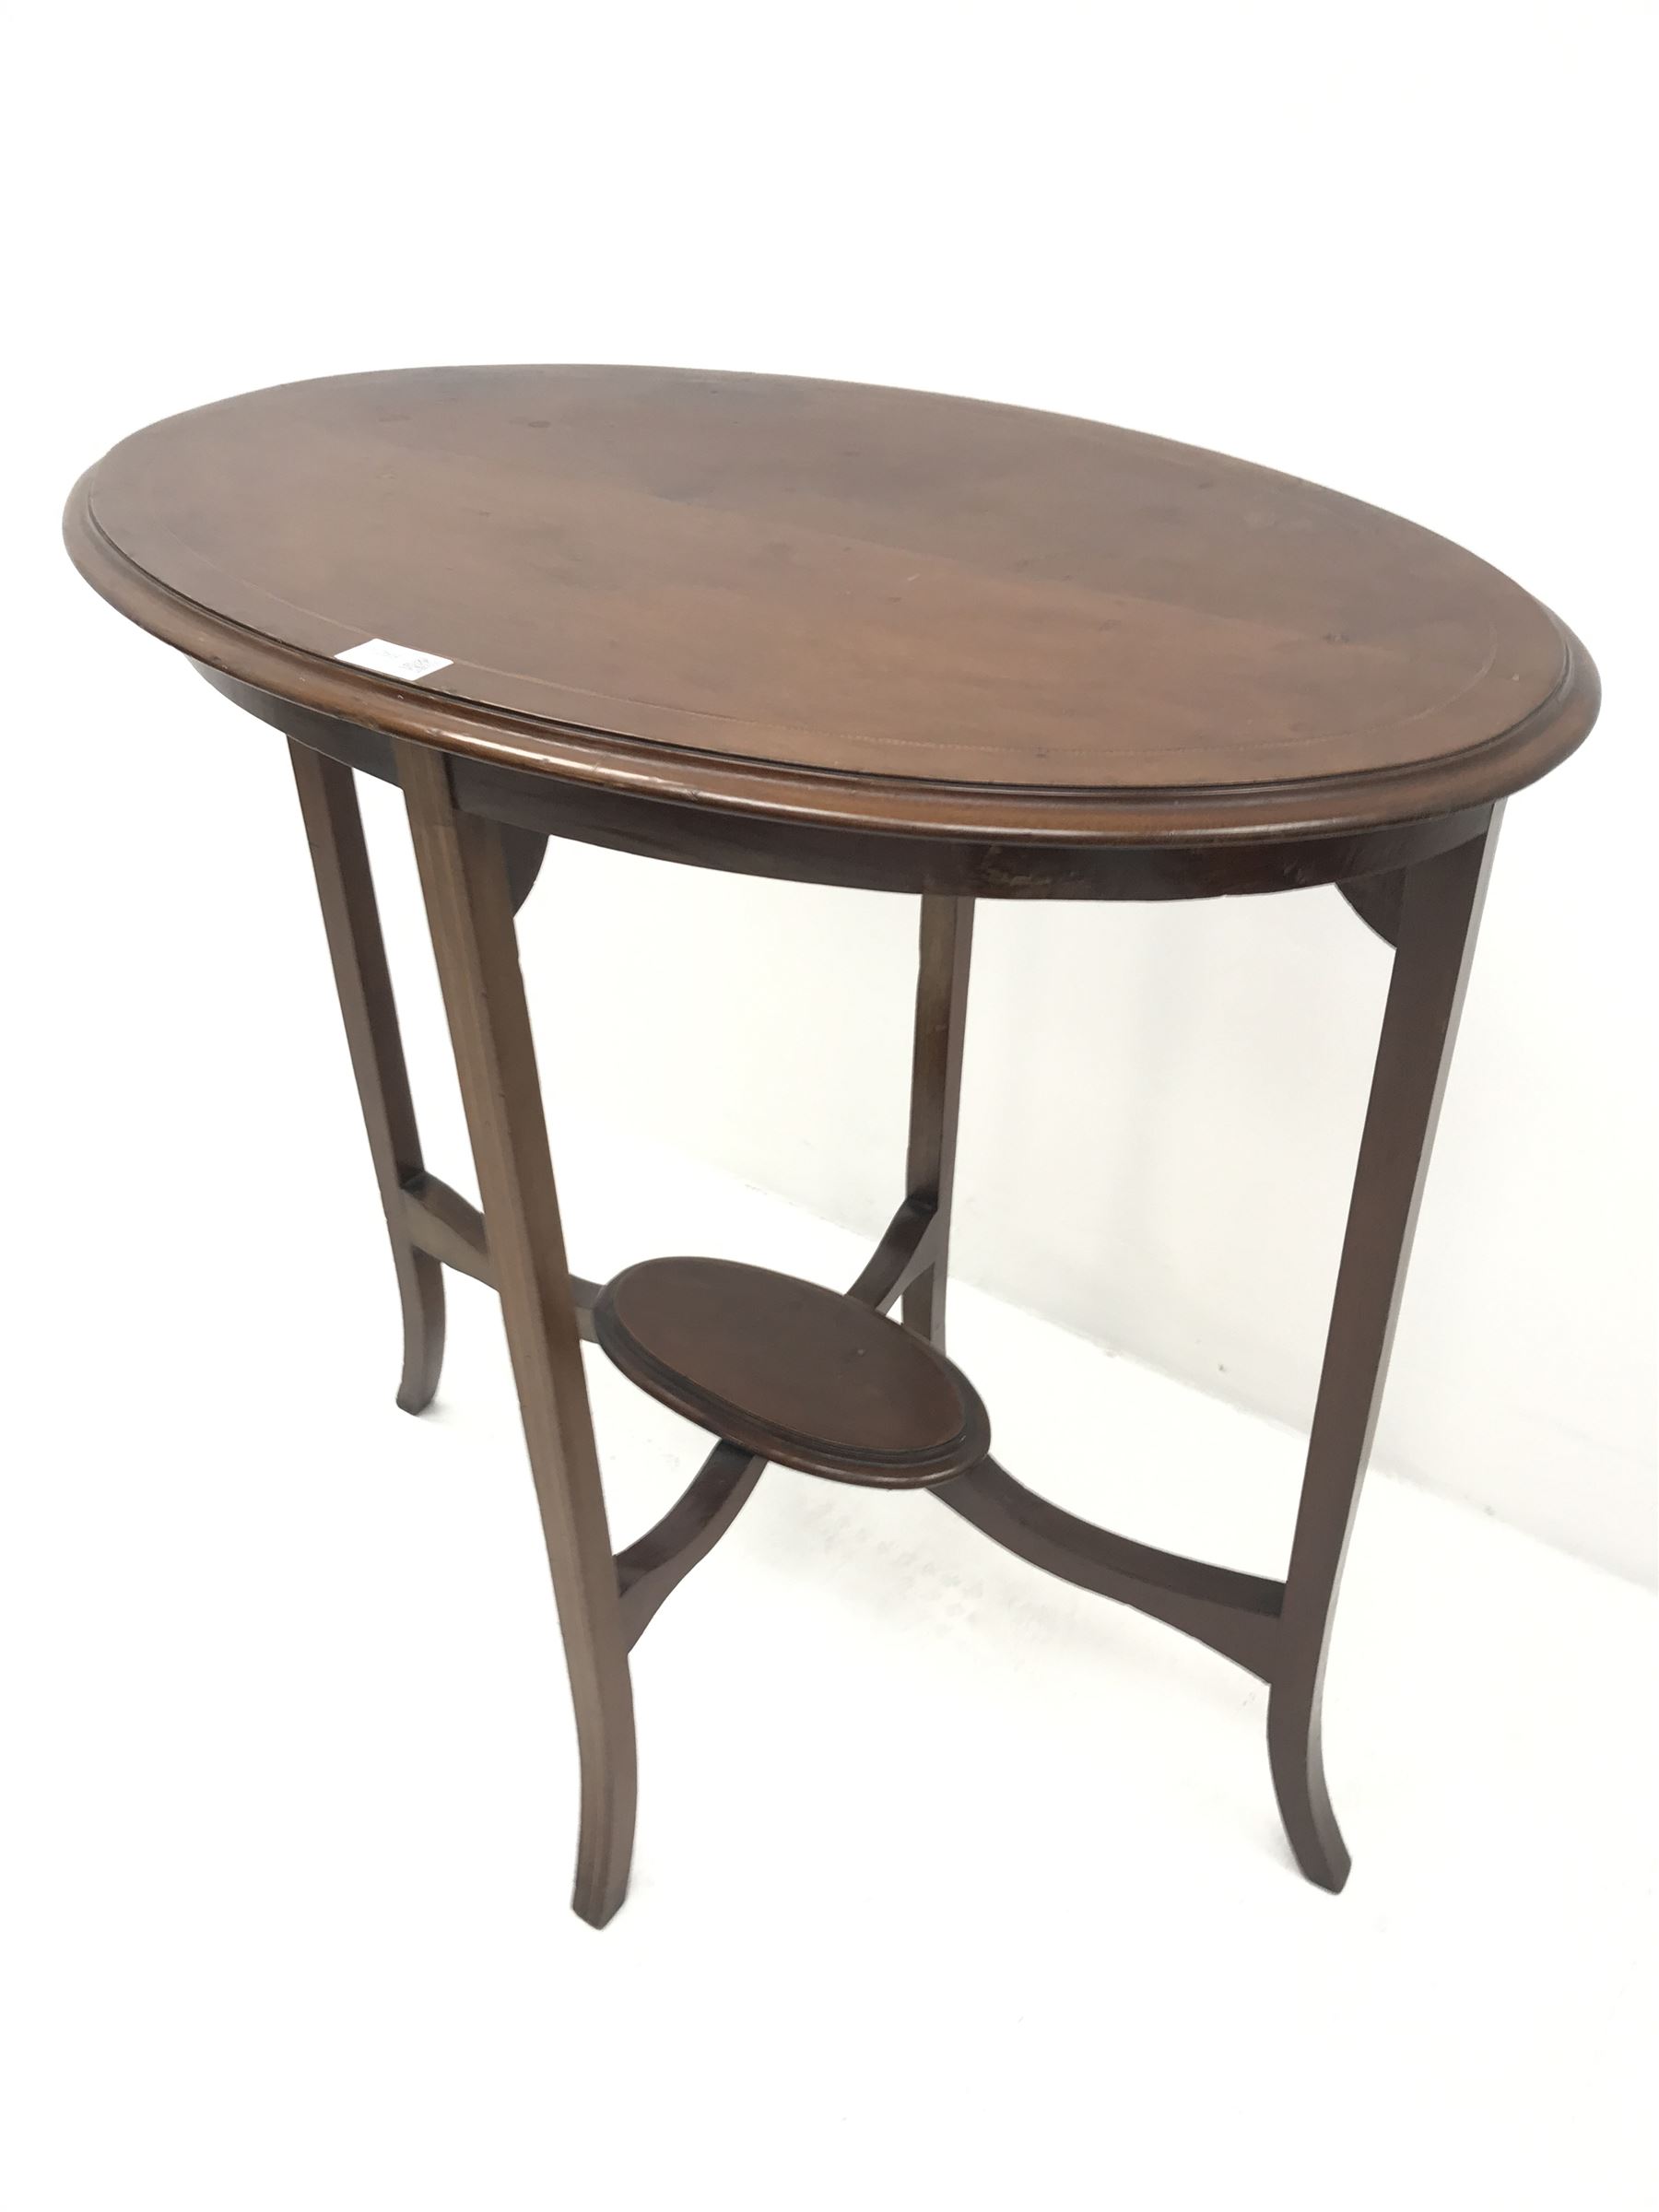 Edwardian inlaid mahogany oval occasional table - Image 3 of 3